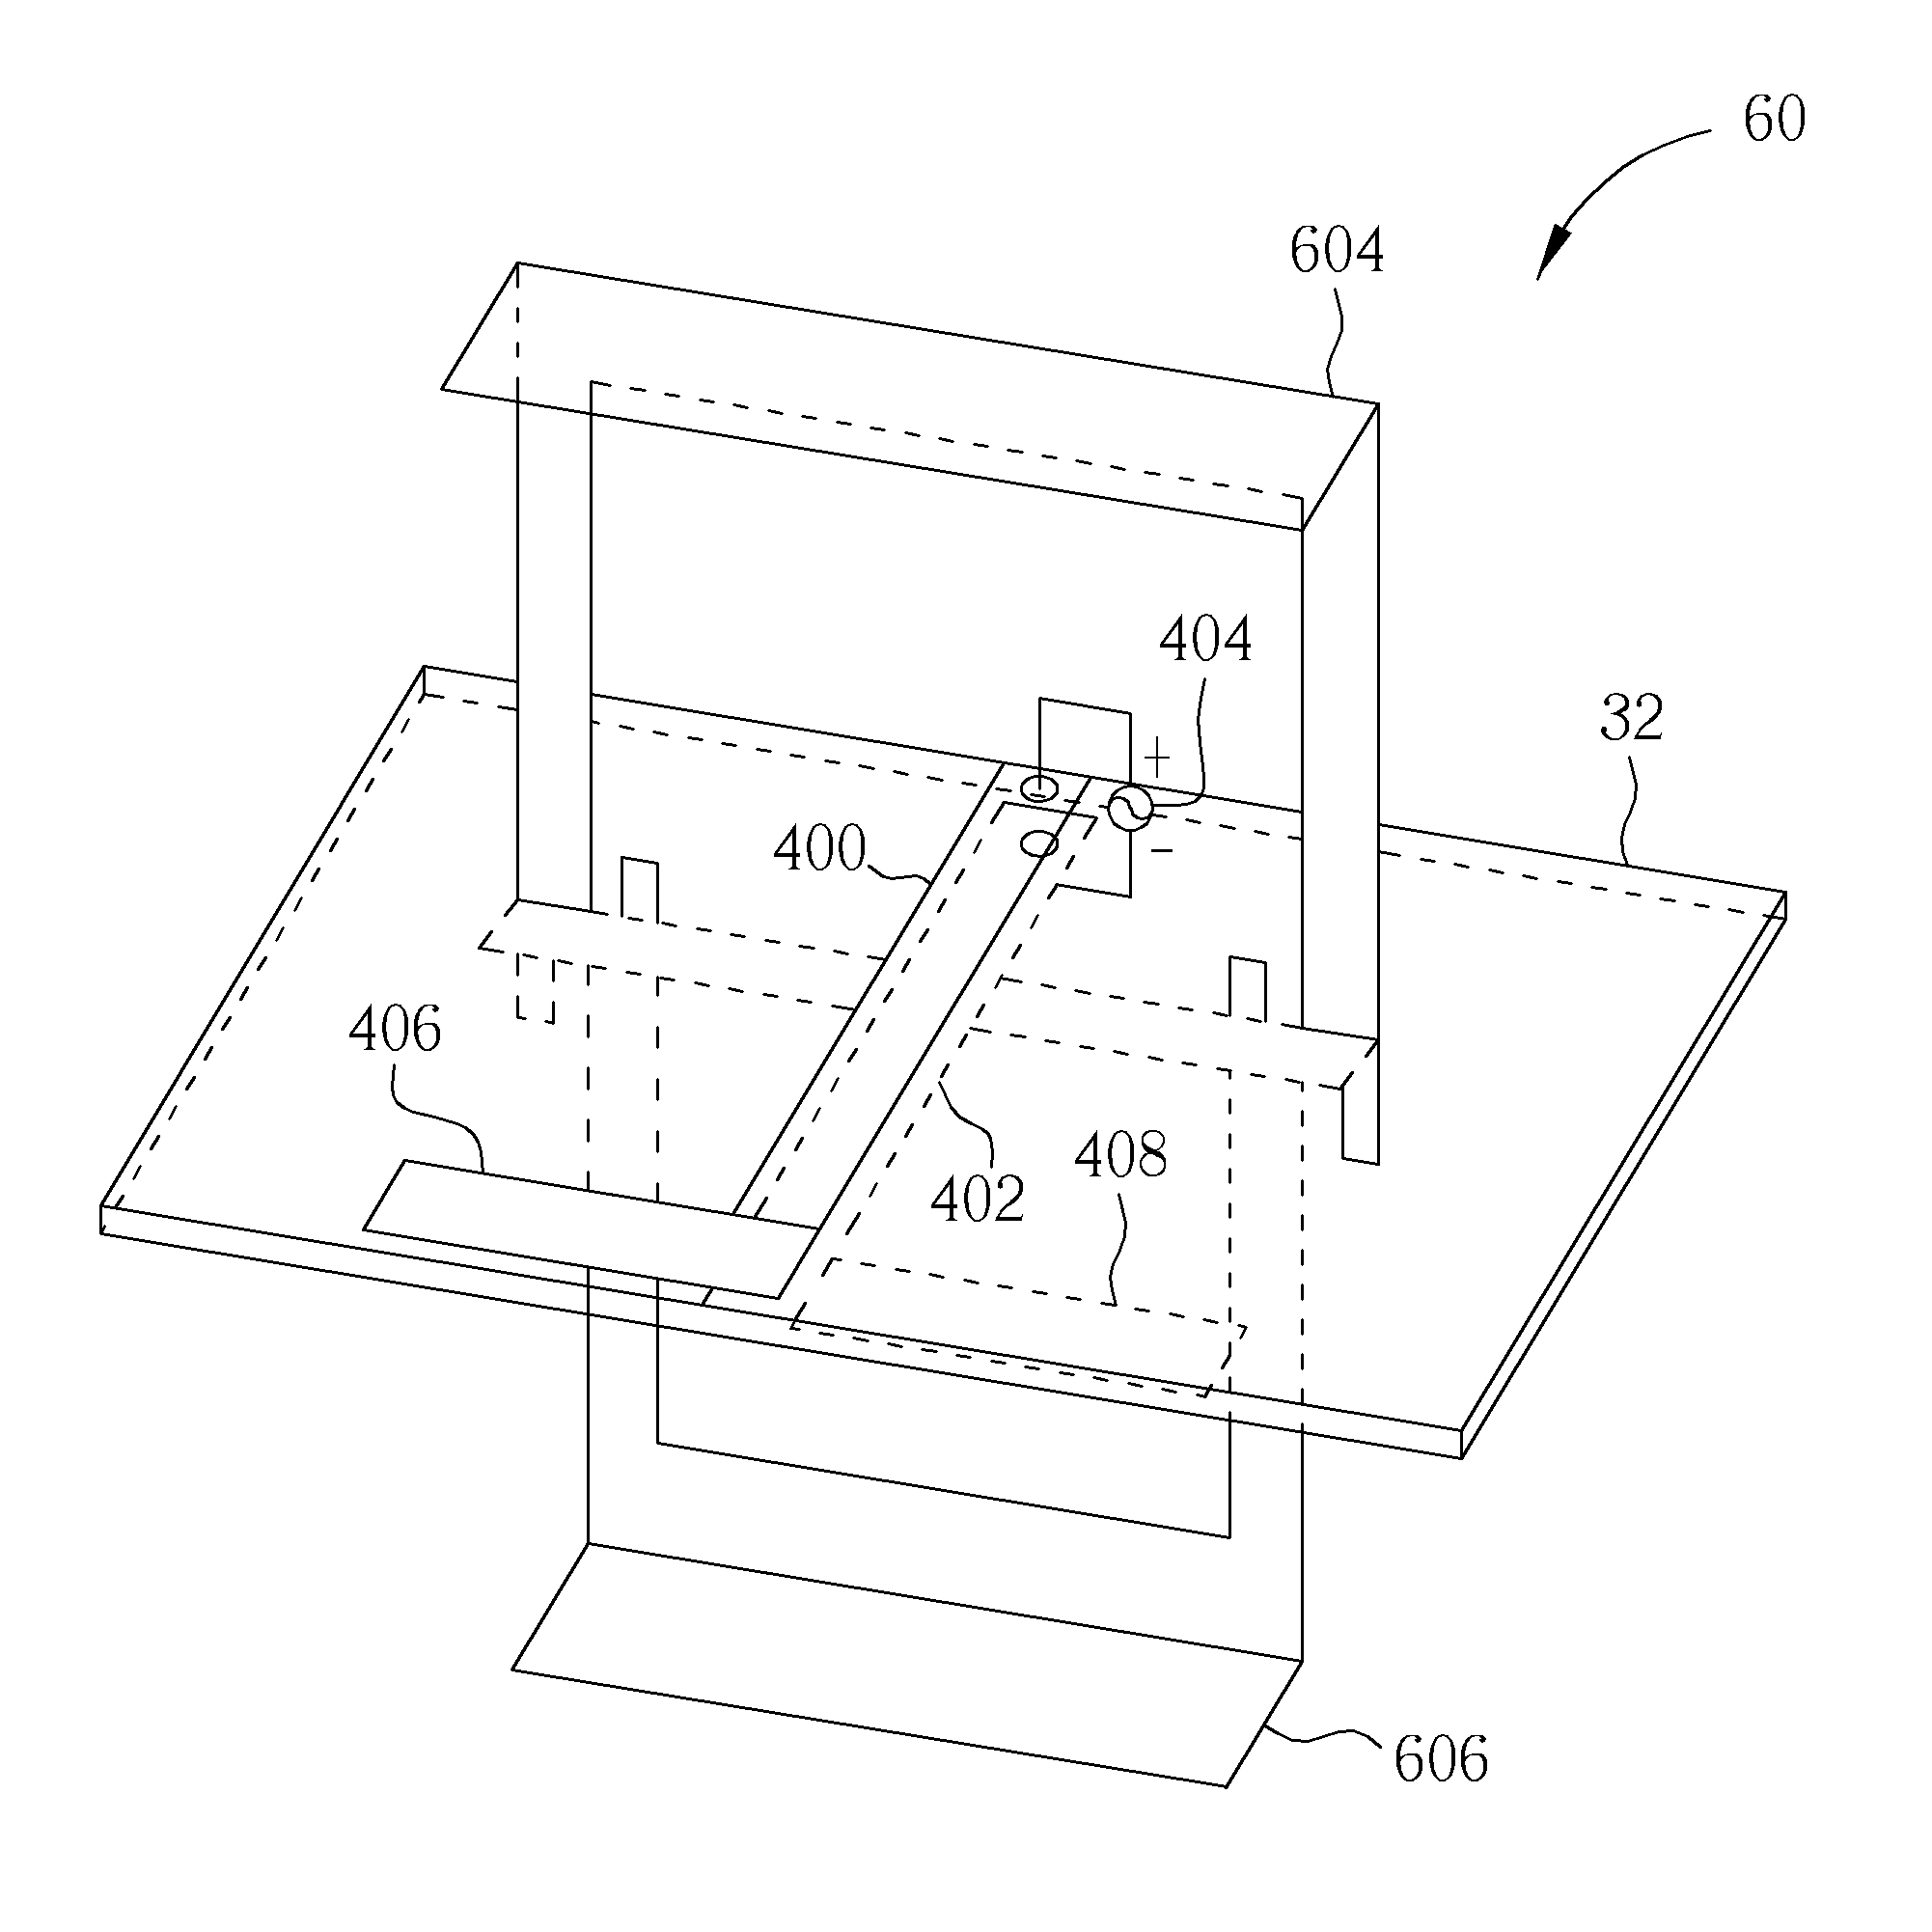 High Gain Antenna and Wireless Device Using the Same